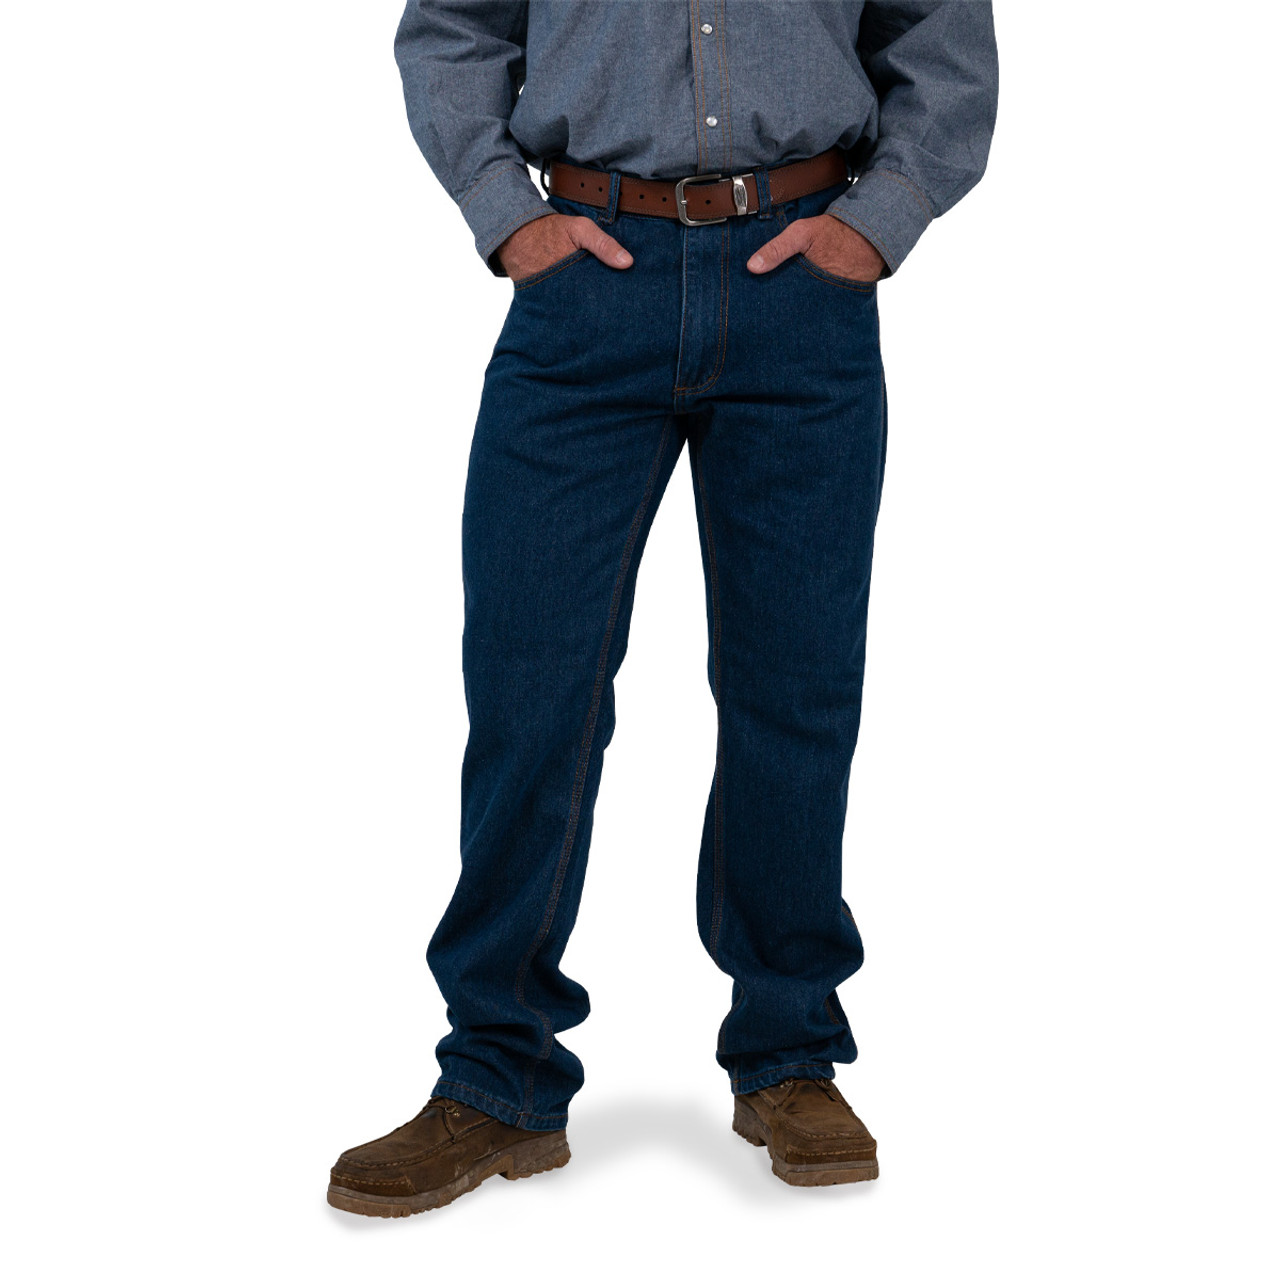 Men's Relaxed Fit Jeans - Performance Comfort - KEY Apparel